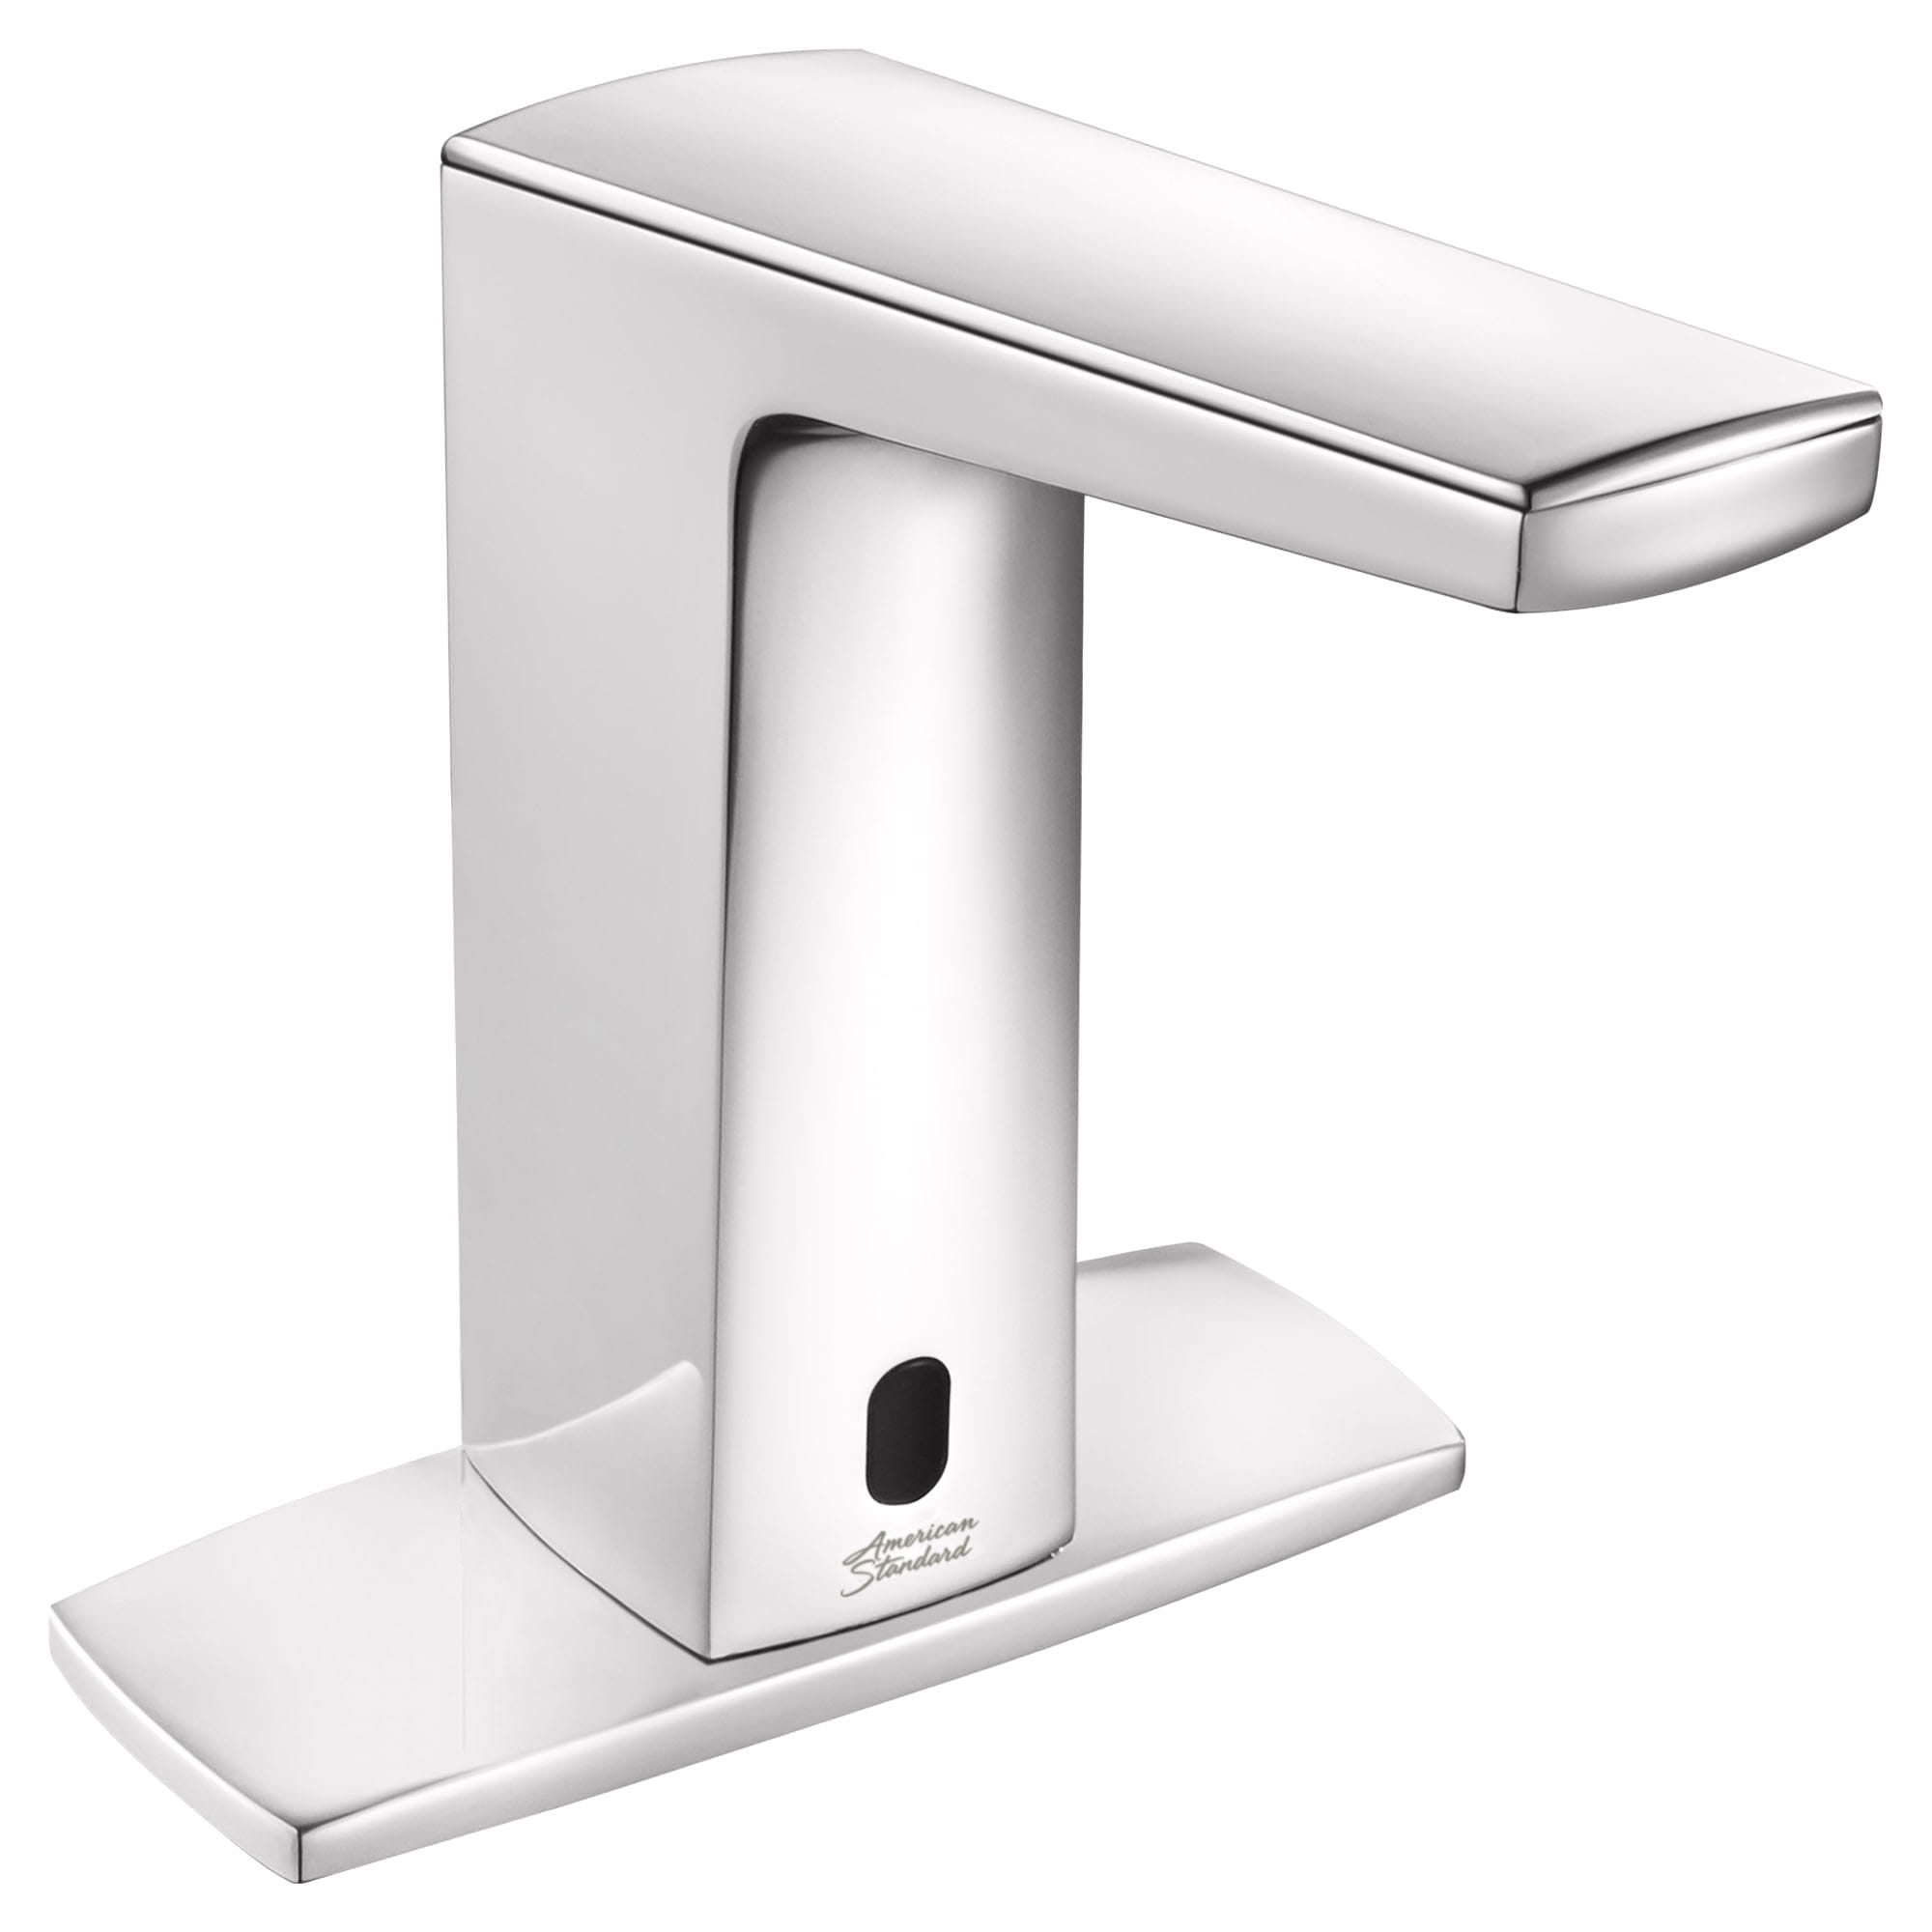 Paradigm Selectronic Touchless Faucet Battery Powered With Above Deck Mixing 035 gpm 13 Lpm CHROME